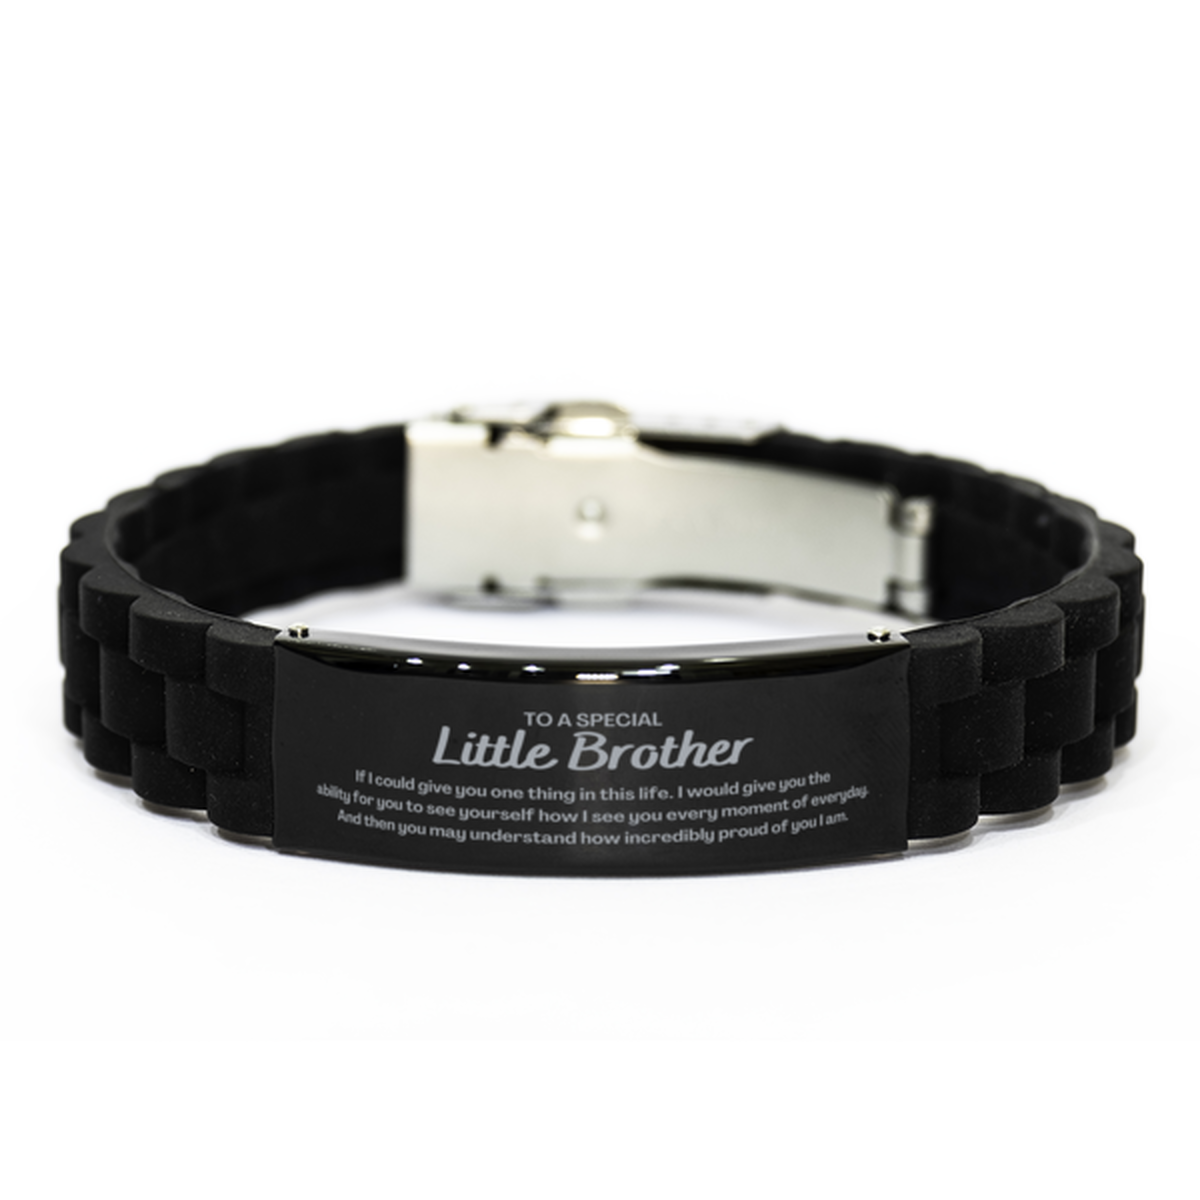 To My Little Brother Black Glidelock Clasp Bracelet, Gifts For Little Brother Engraved, Inspirational Gifts for Christmas Birthday, Epic Gifts for Little Brother To A Special Little Brother how incredibly proud of you I am